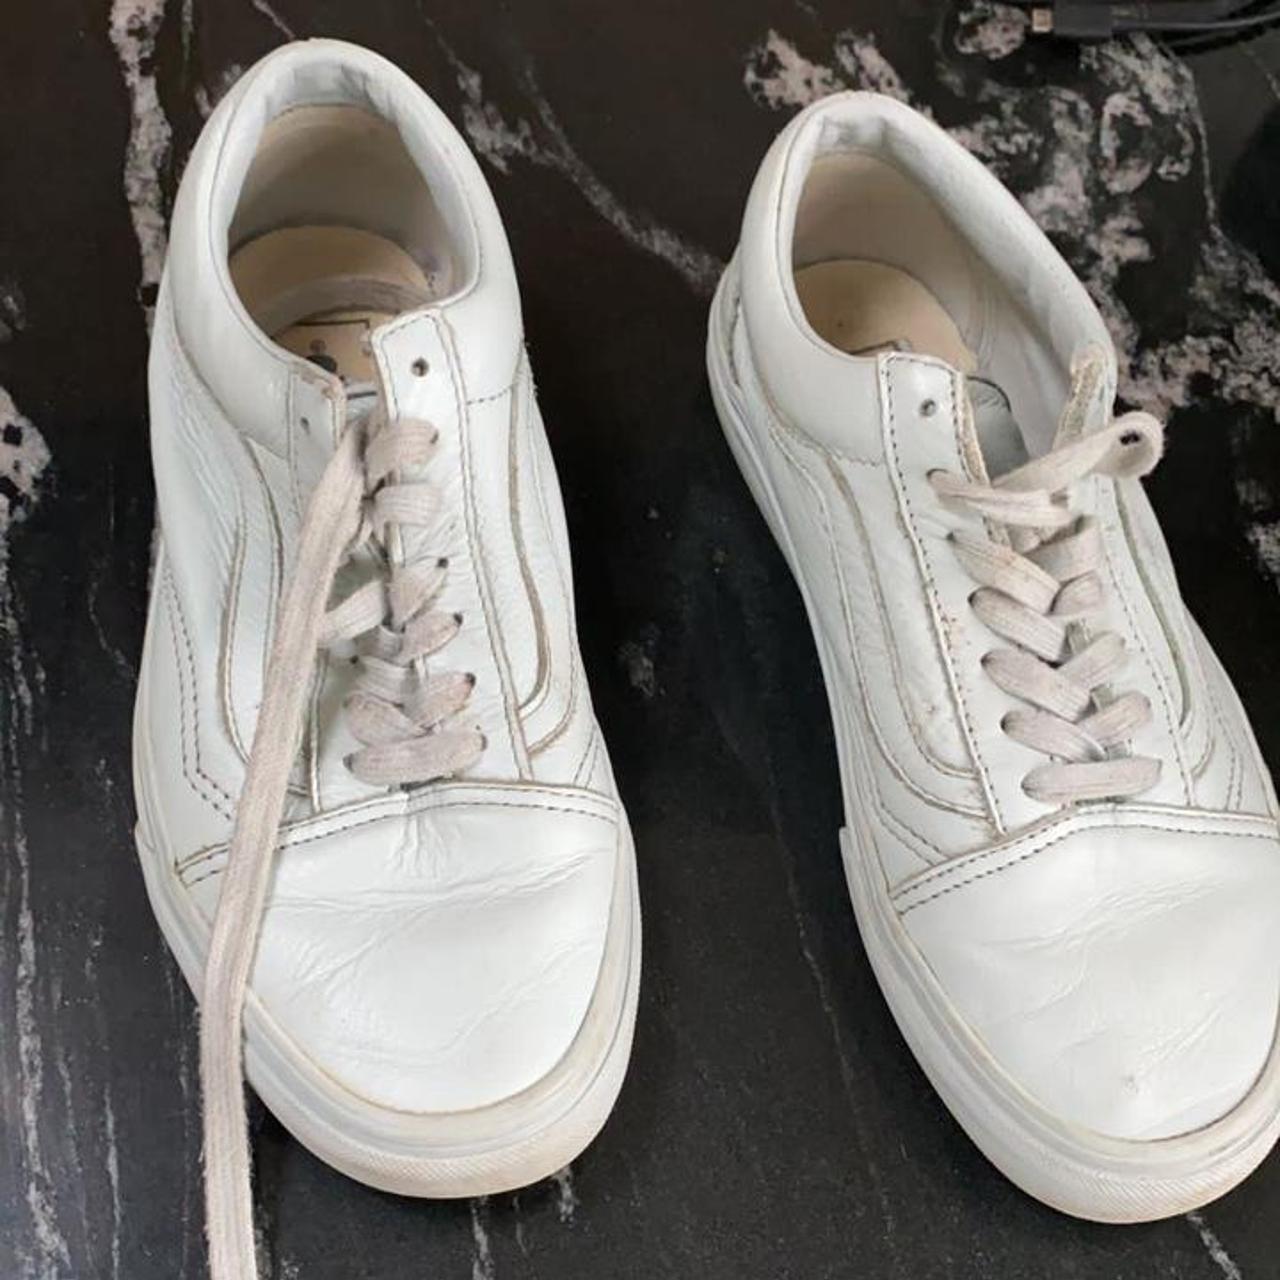 Product Image 1 - Vans leather trainers. Worn but